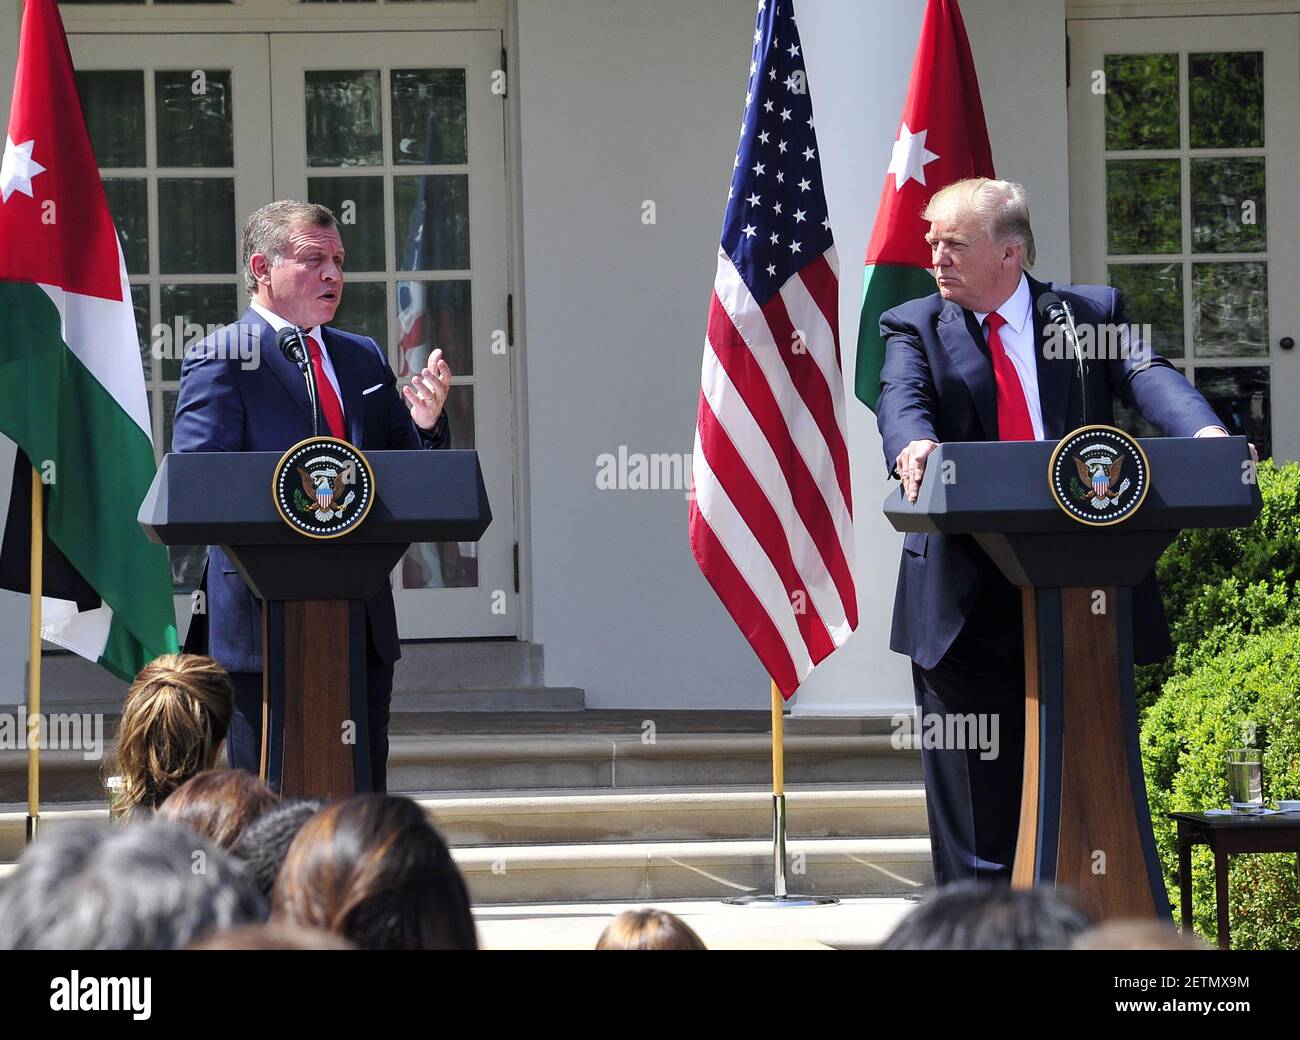 United States President Donald J. Trump, right, and King Abdullah II of Jordan, left, conduct a joint press conference in the Rose Garden of the White House in Washington, DC on Wednesday, April 5, 2017. Credit: Ron Sachs / CNP *** Please Use Credit from Credit Field ***  Stock Photo